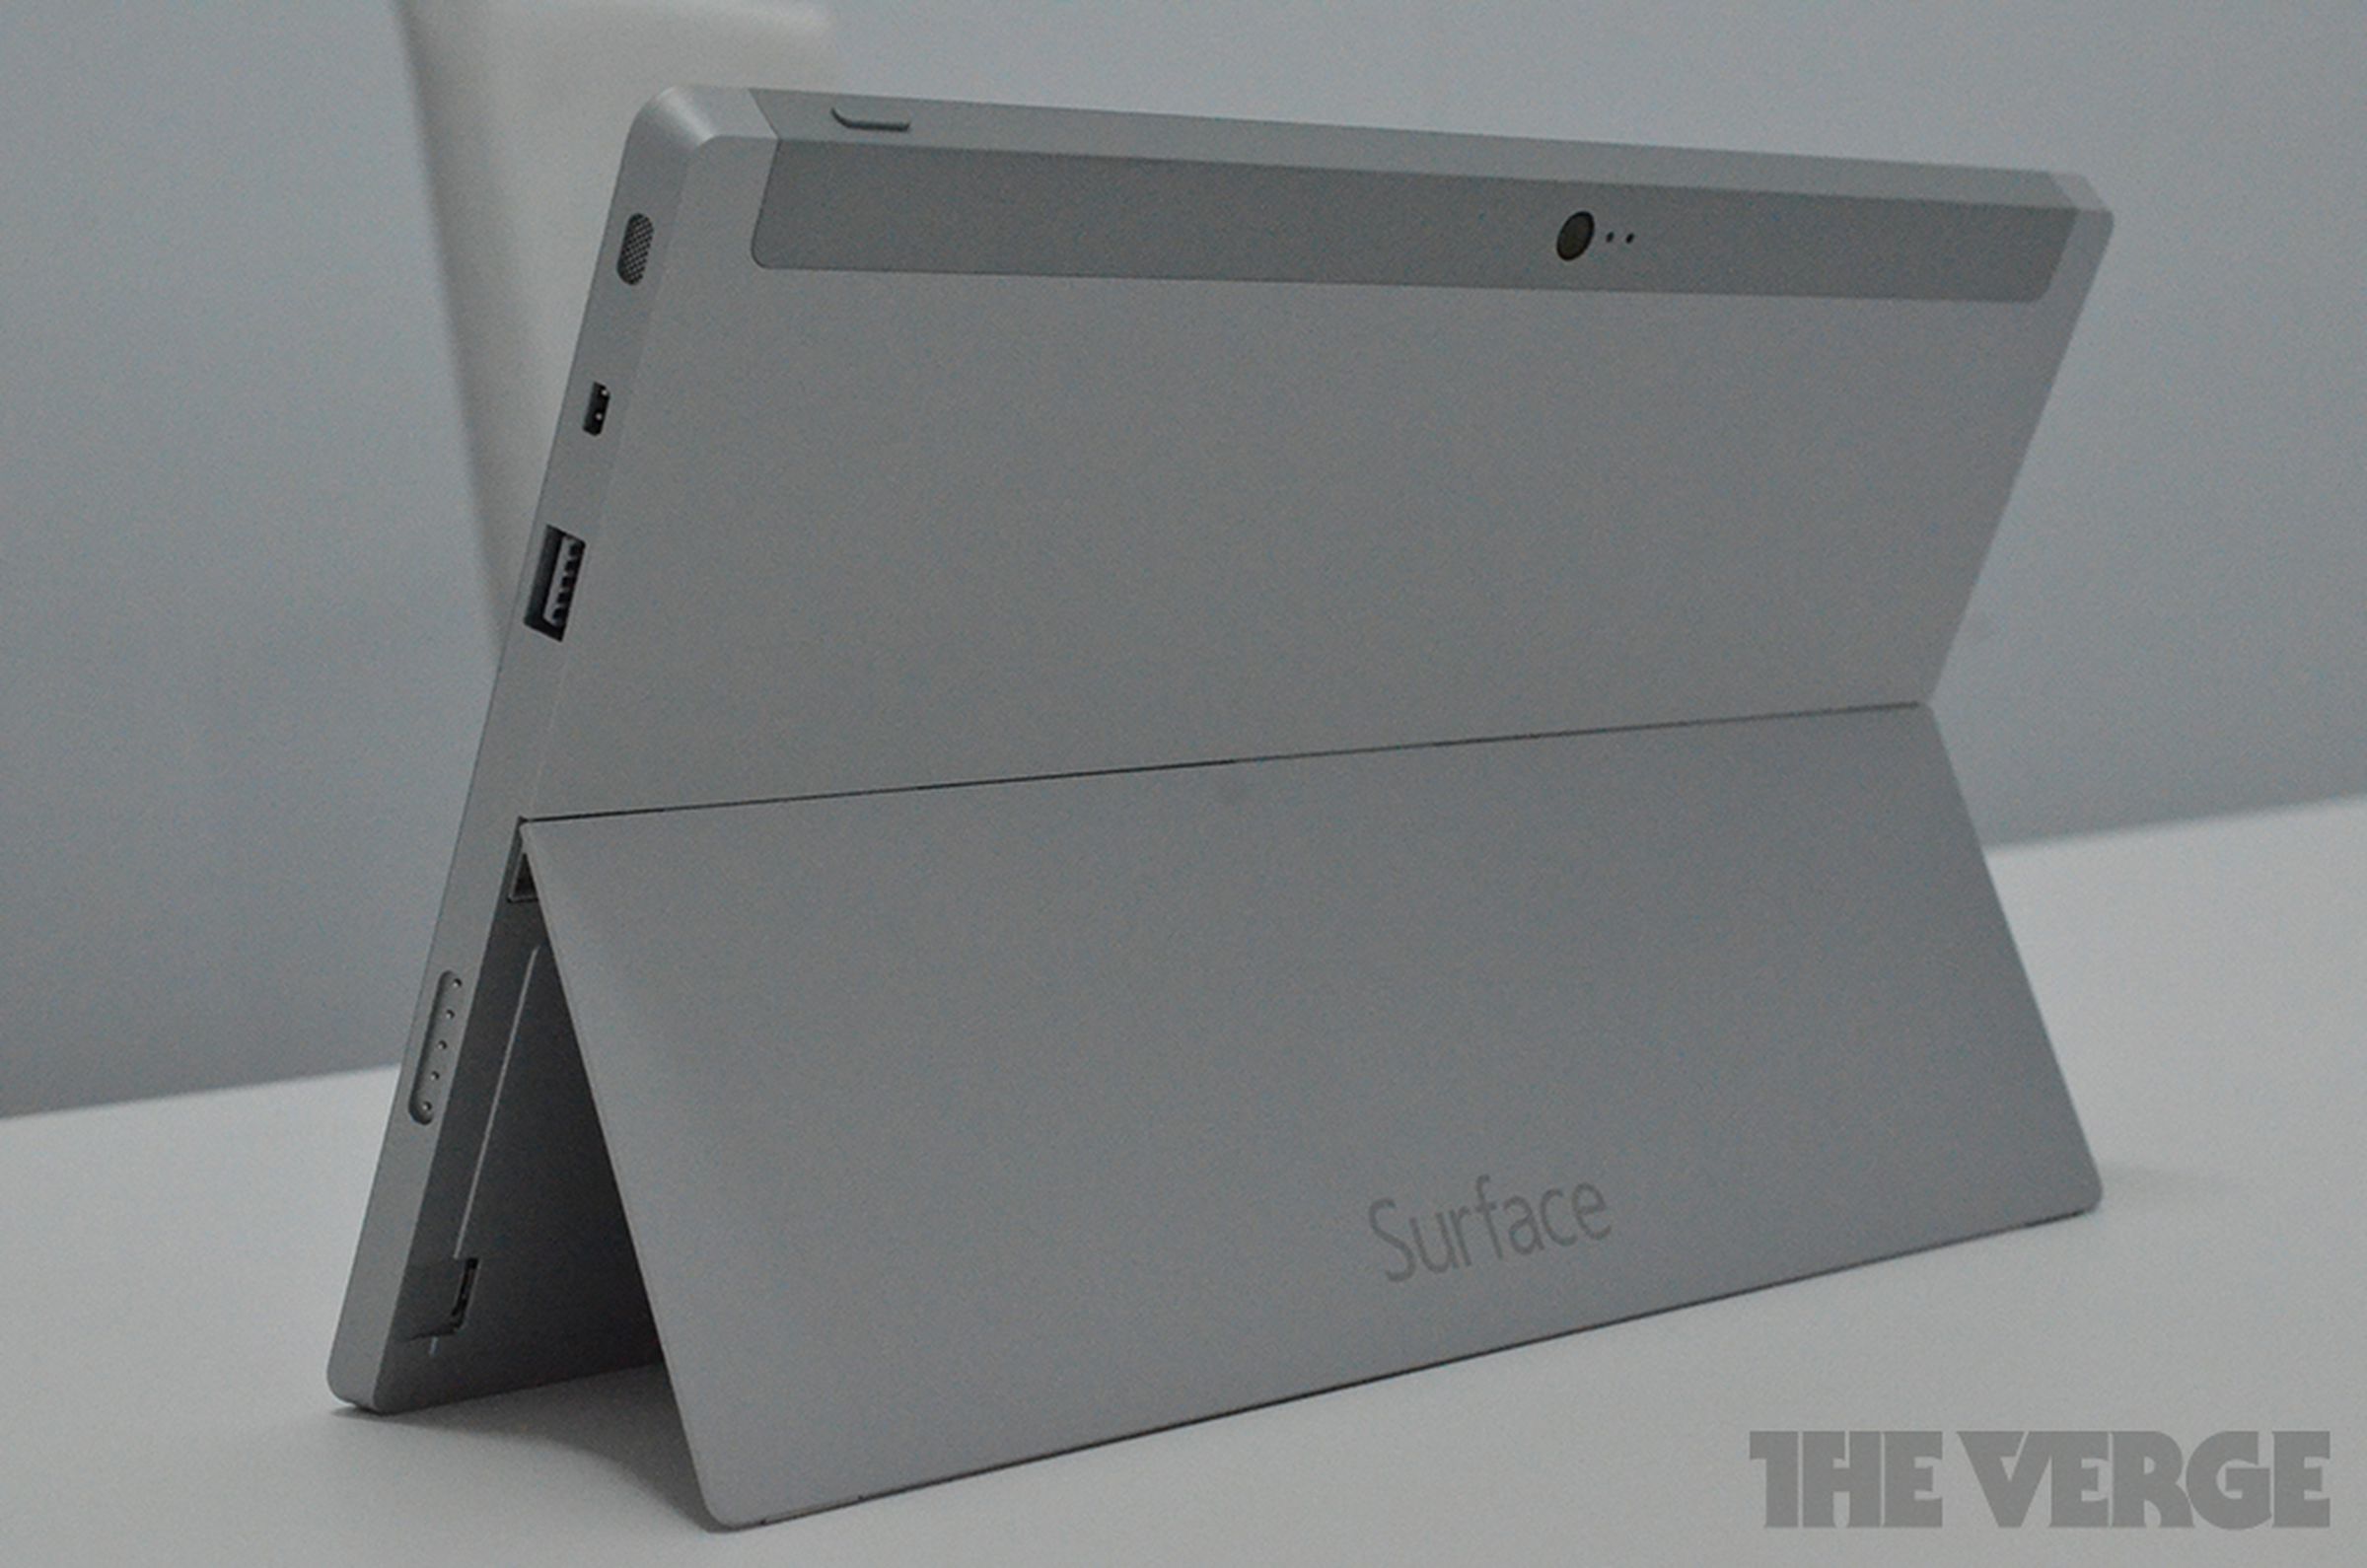 Surface 2 hands-on photos